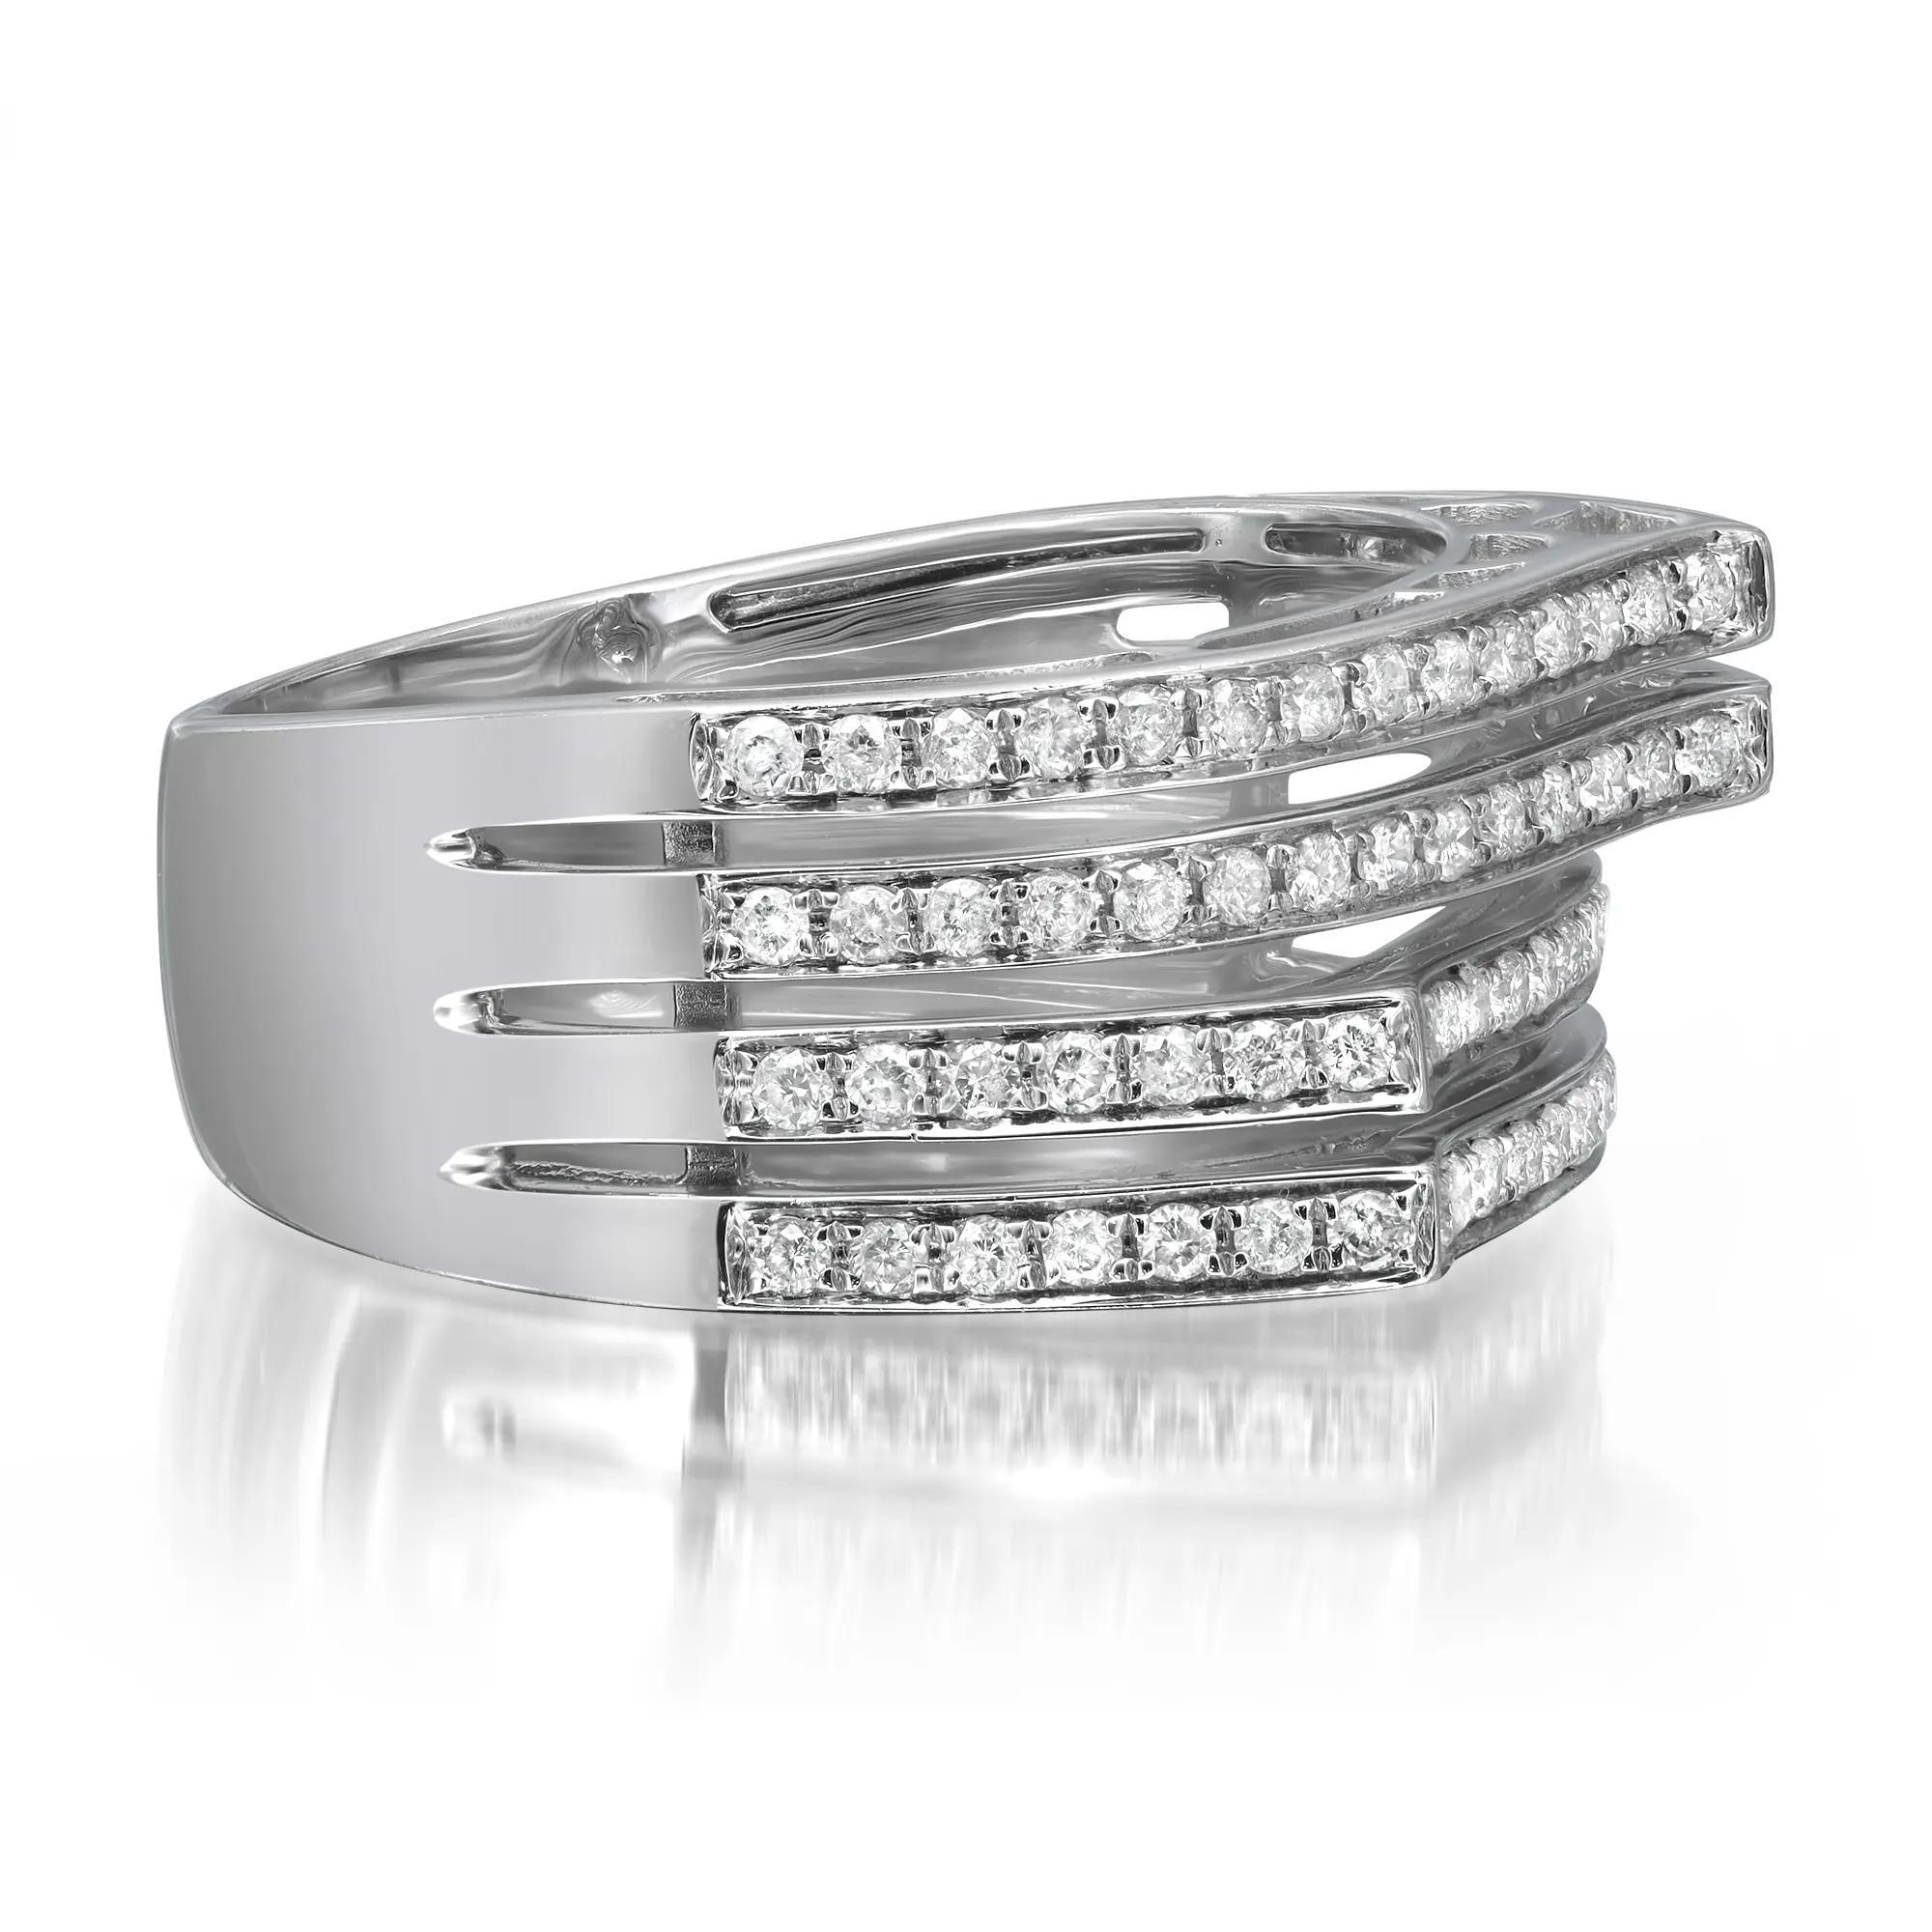 This elegant and classic diamond band ring is crafted in 14k white. Features four rows of pave set round brilliant cut diamonds weighing 0.56 carat. Ring width: 9.4mm. Ring size: 7.5. Total weight: 5.11 grams. Perfect addition to your jewelry